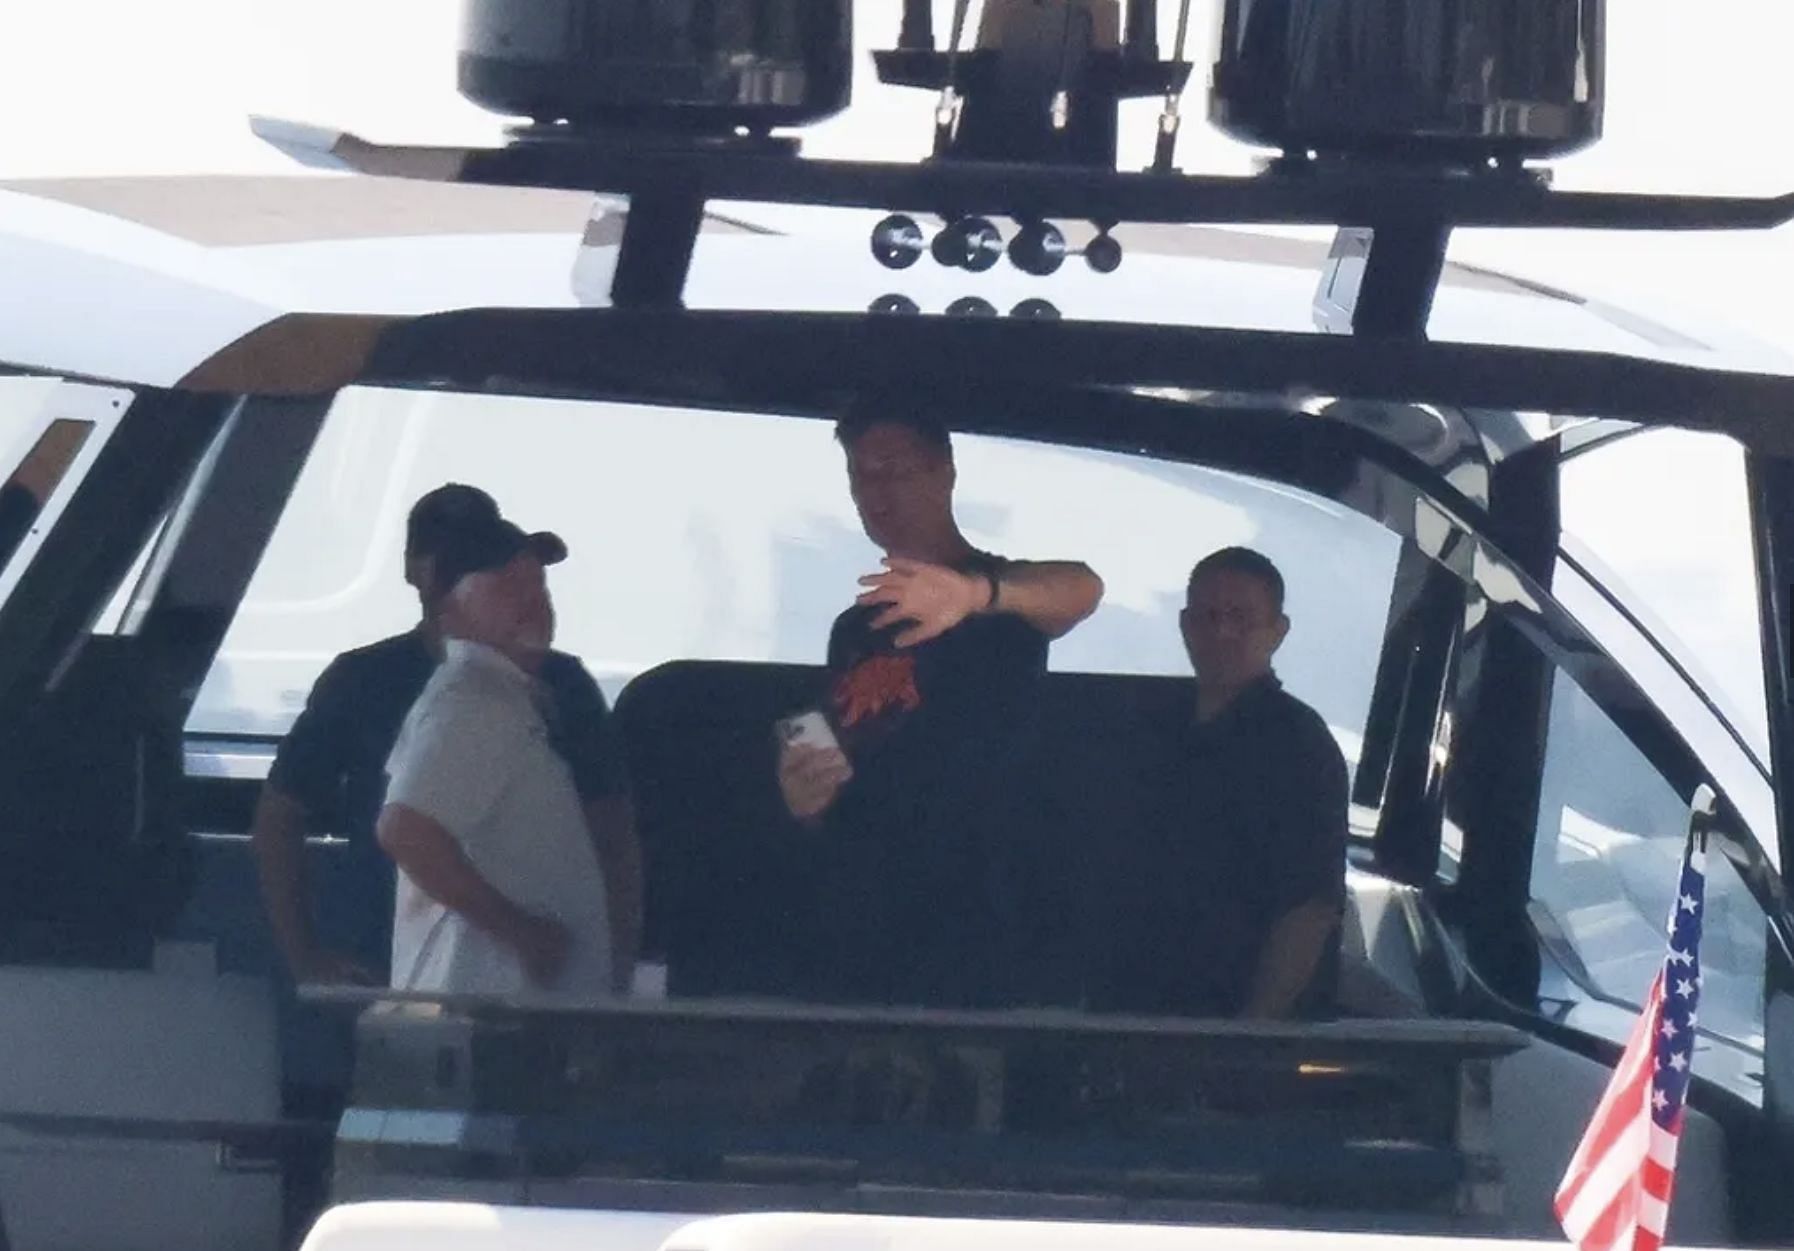 Brady hanging out with friends aboard TW12VE ANGELS. Credit: TMZ